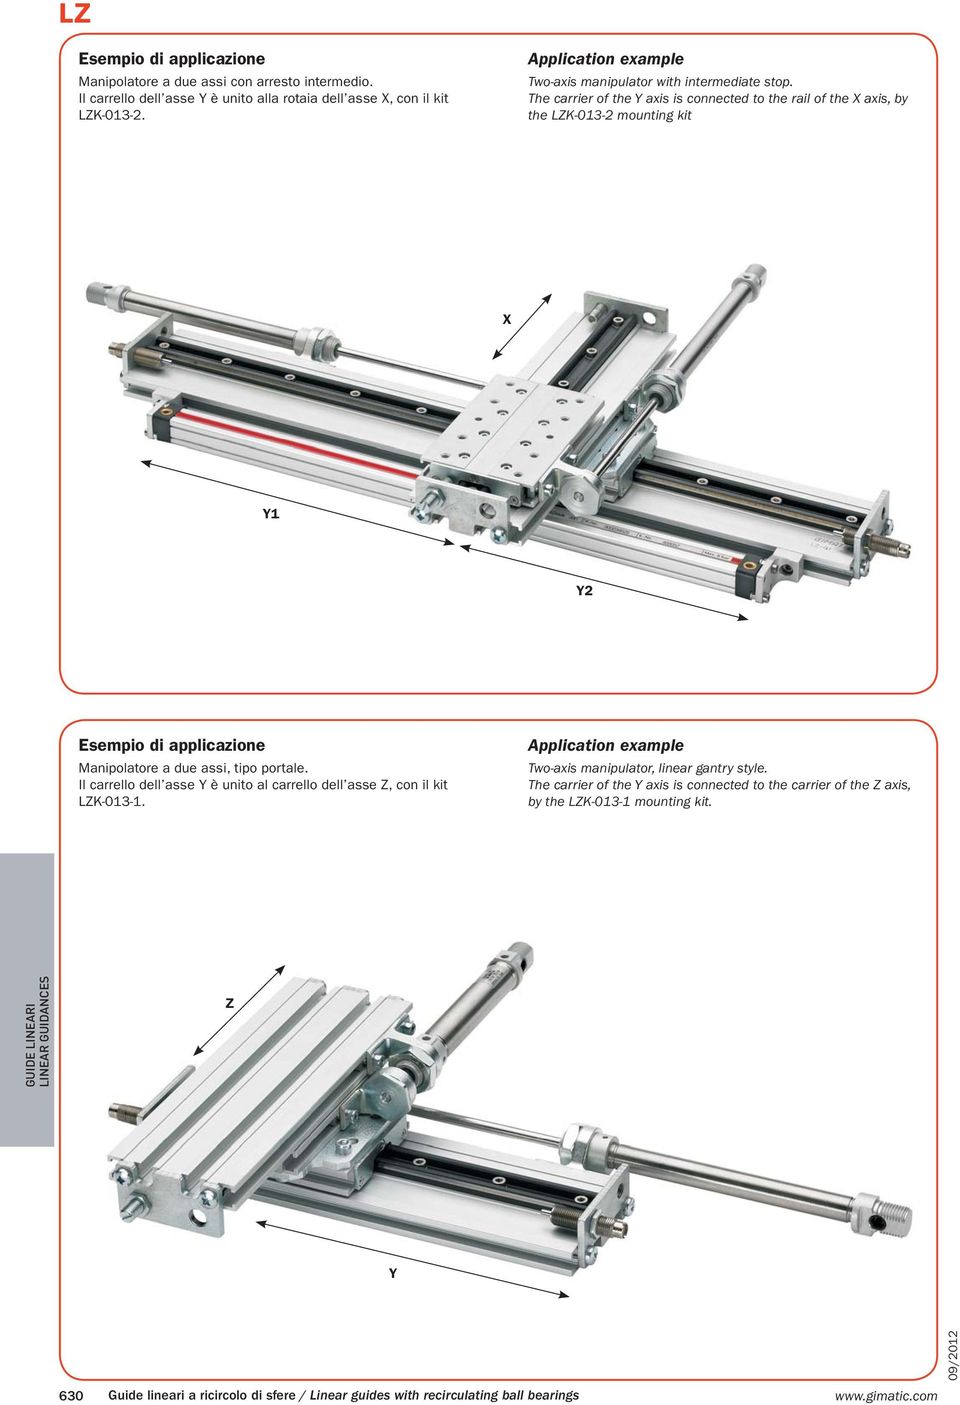 The carrier of the Y axis is connected to the rail of the X axis, by the LZK-013-2 mounting kit X Y1 Y2 Esempio di applicazione Manipolatore a due assi, tipo portale.